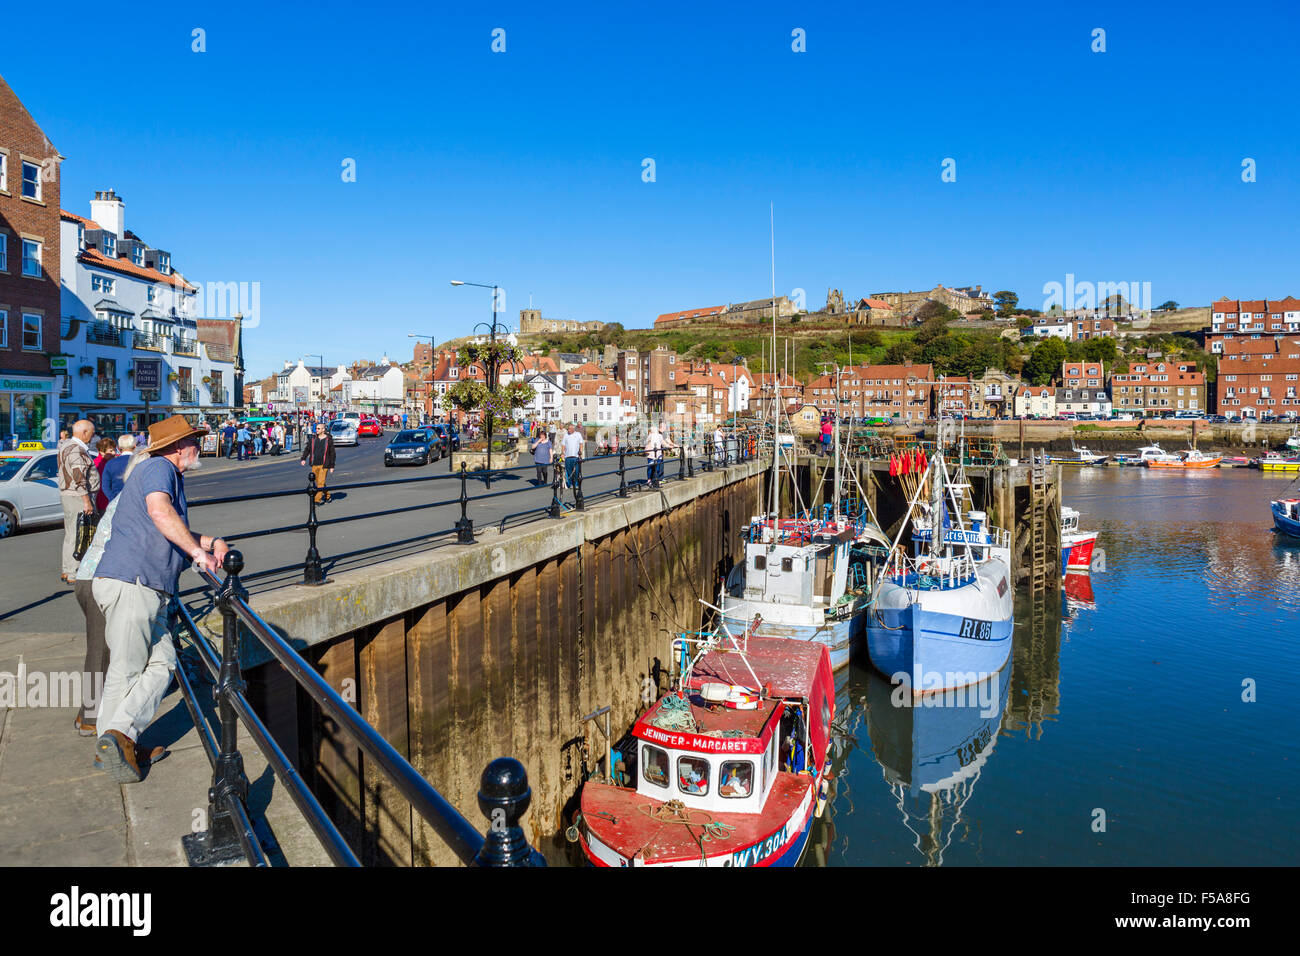 Fishing boats moored in the harbour in Whitby, North Yorkshire, England, UK Stock Photo